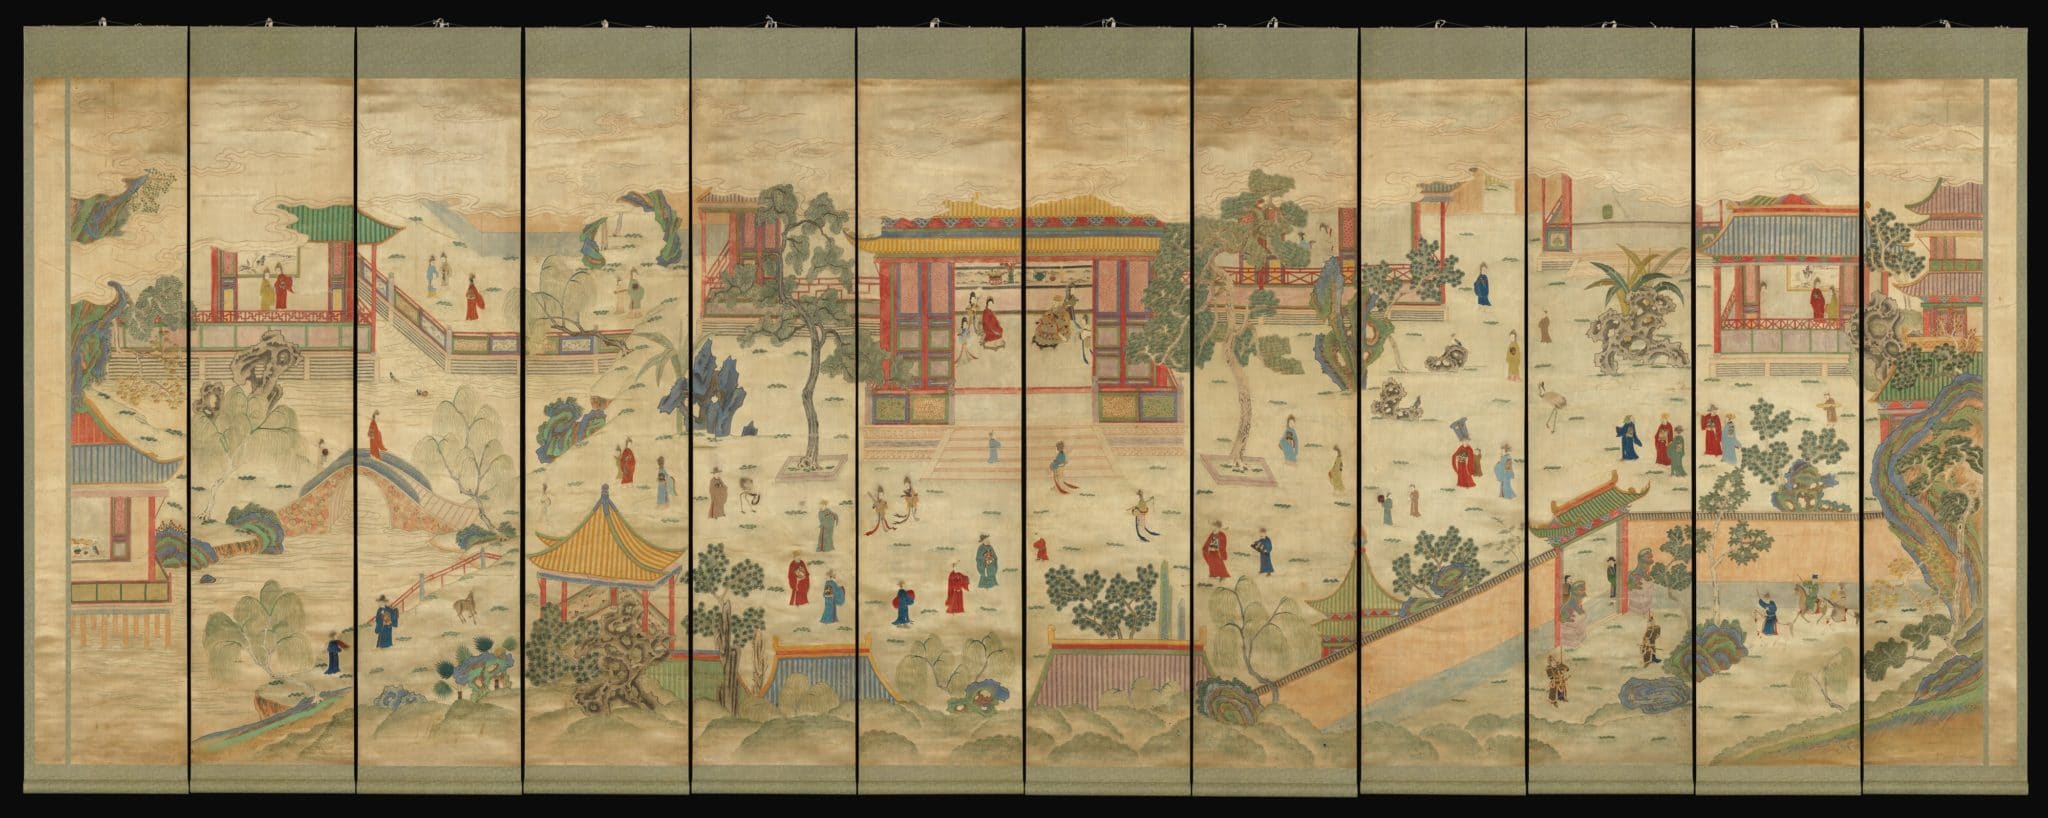 a traditional Chinese painting showing a scene featuring buildings, trees and people